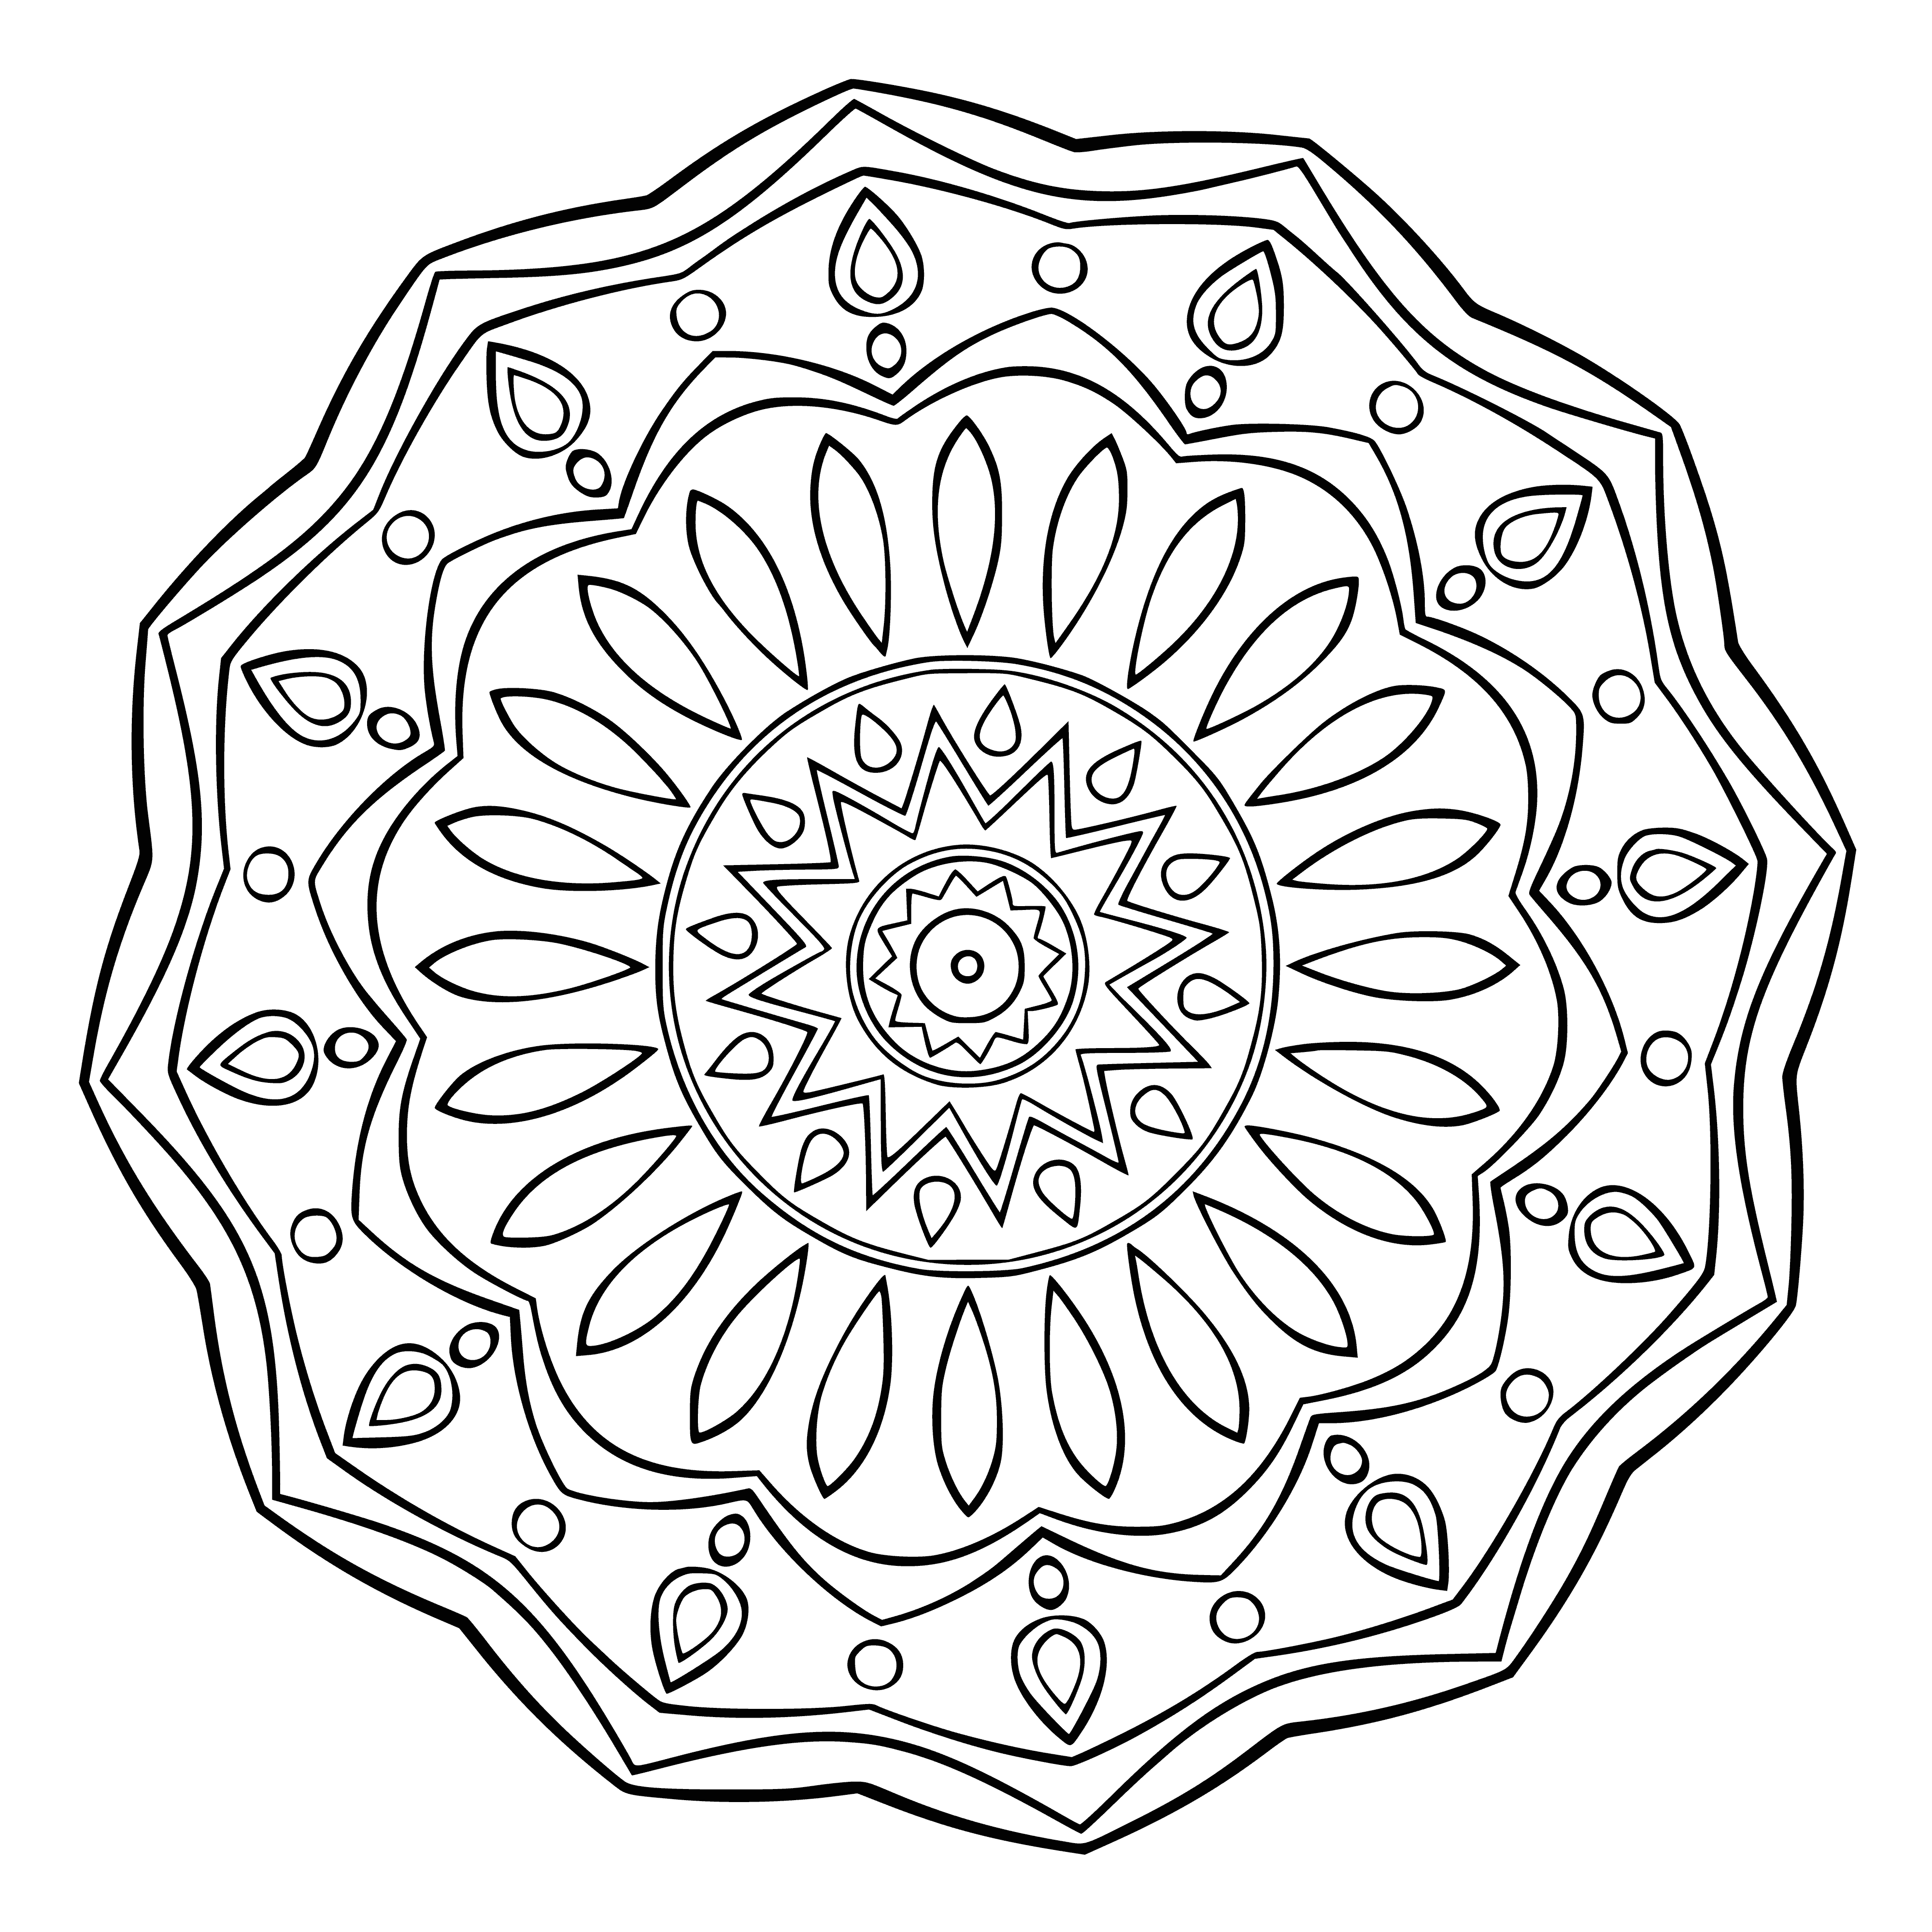 coloring page: Mandala art promotes relaxation, self-awareness, and understanding; it's a symbol of the universe, used in meditation and coloring page activities.